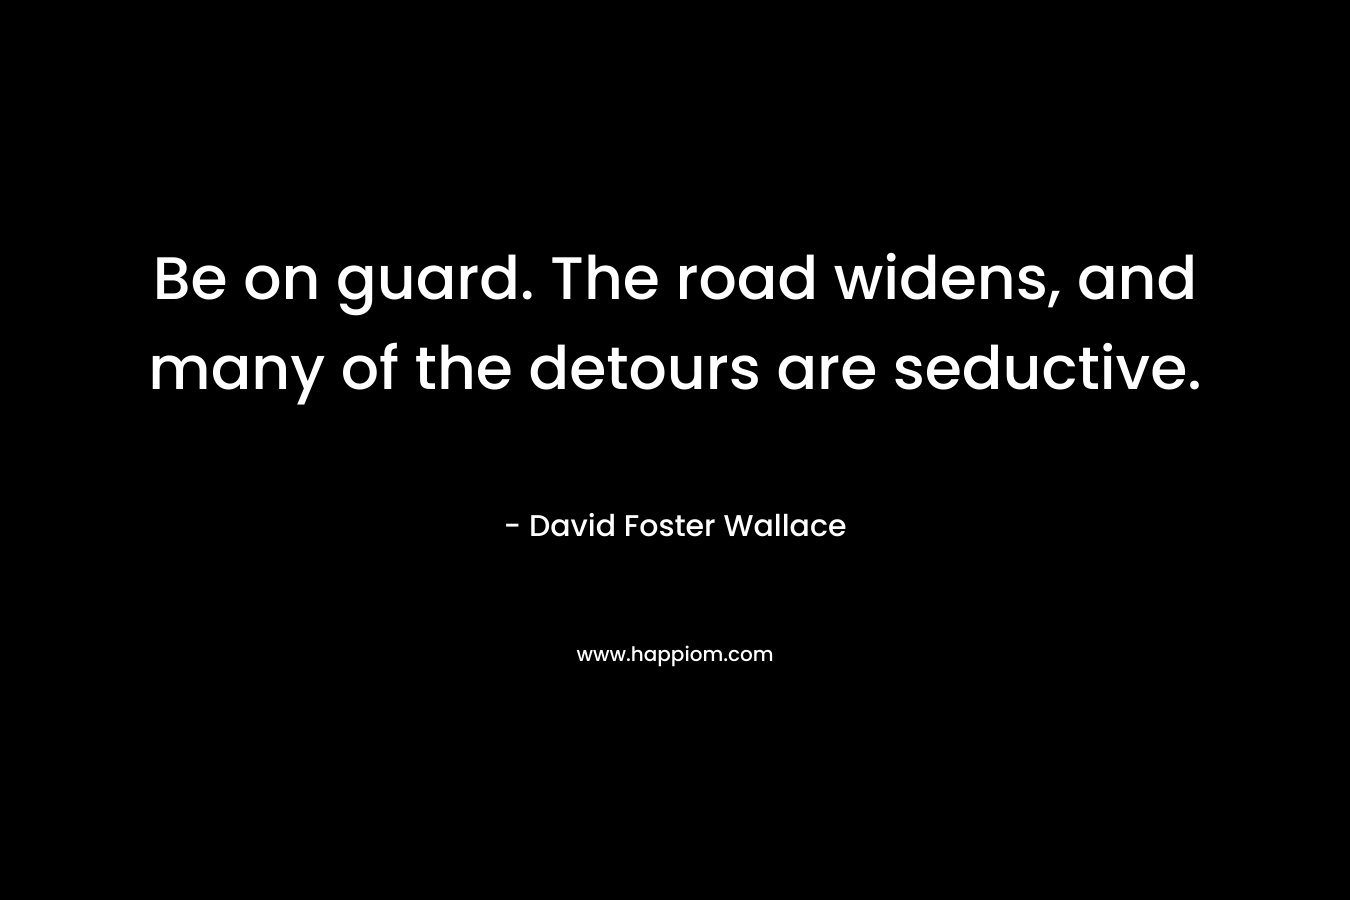 Be on guard. The road widens, and many of the detours are seductive. – David Foster Wallace